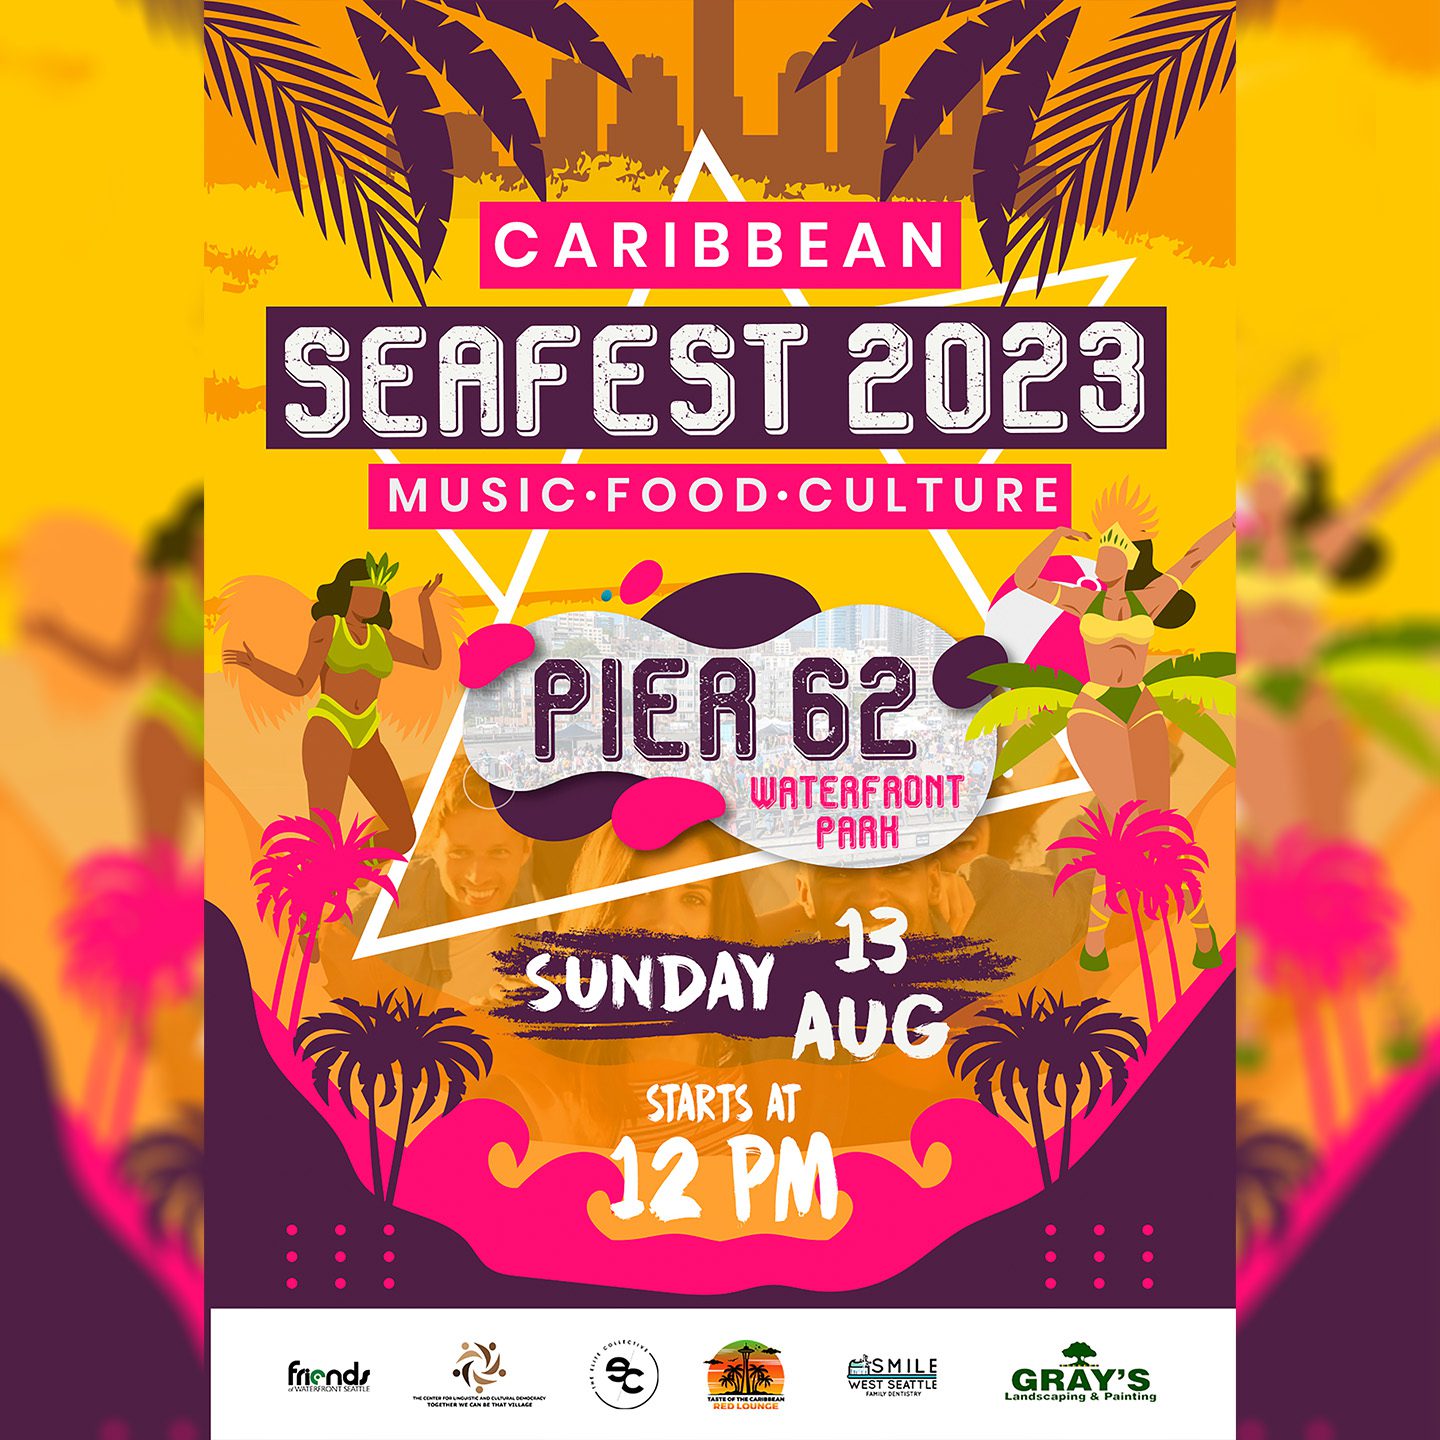 Caribbean Sea Fest 2023: a poster in hot pink, purple, bright yellows, and oranges has two partying figures with festive costuming, palm tree and ocean wave silhouettes, it reads Pier 62 Waterfront Park, Caribbean SEa Fest 2023 music, food, culture, starts as 12pm, and shows 5 tiny sponsor logos at the bottom.